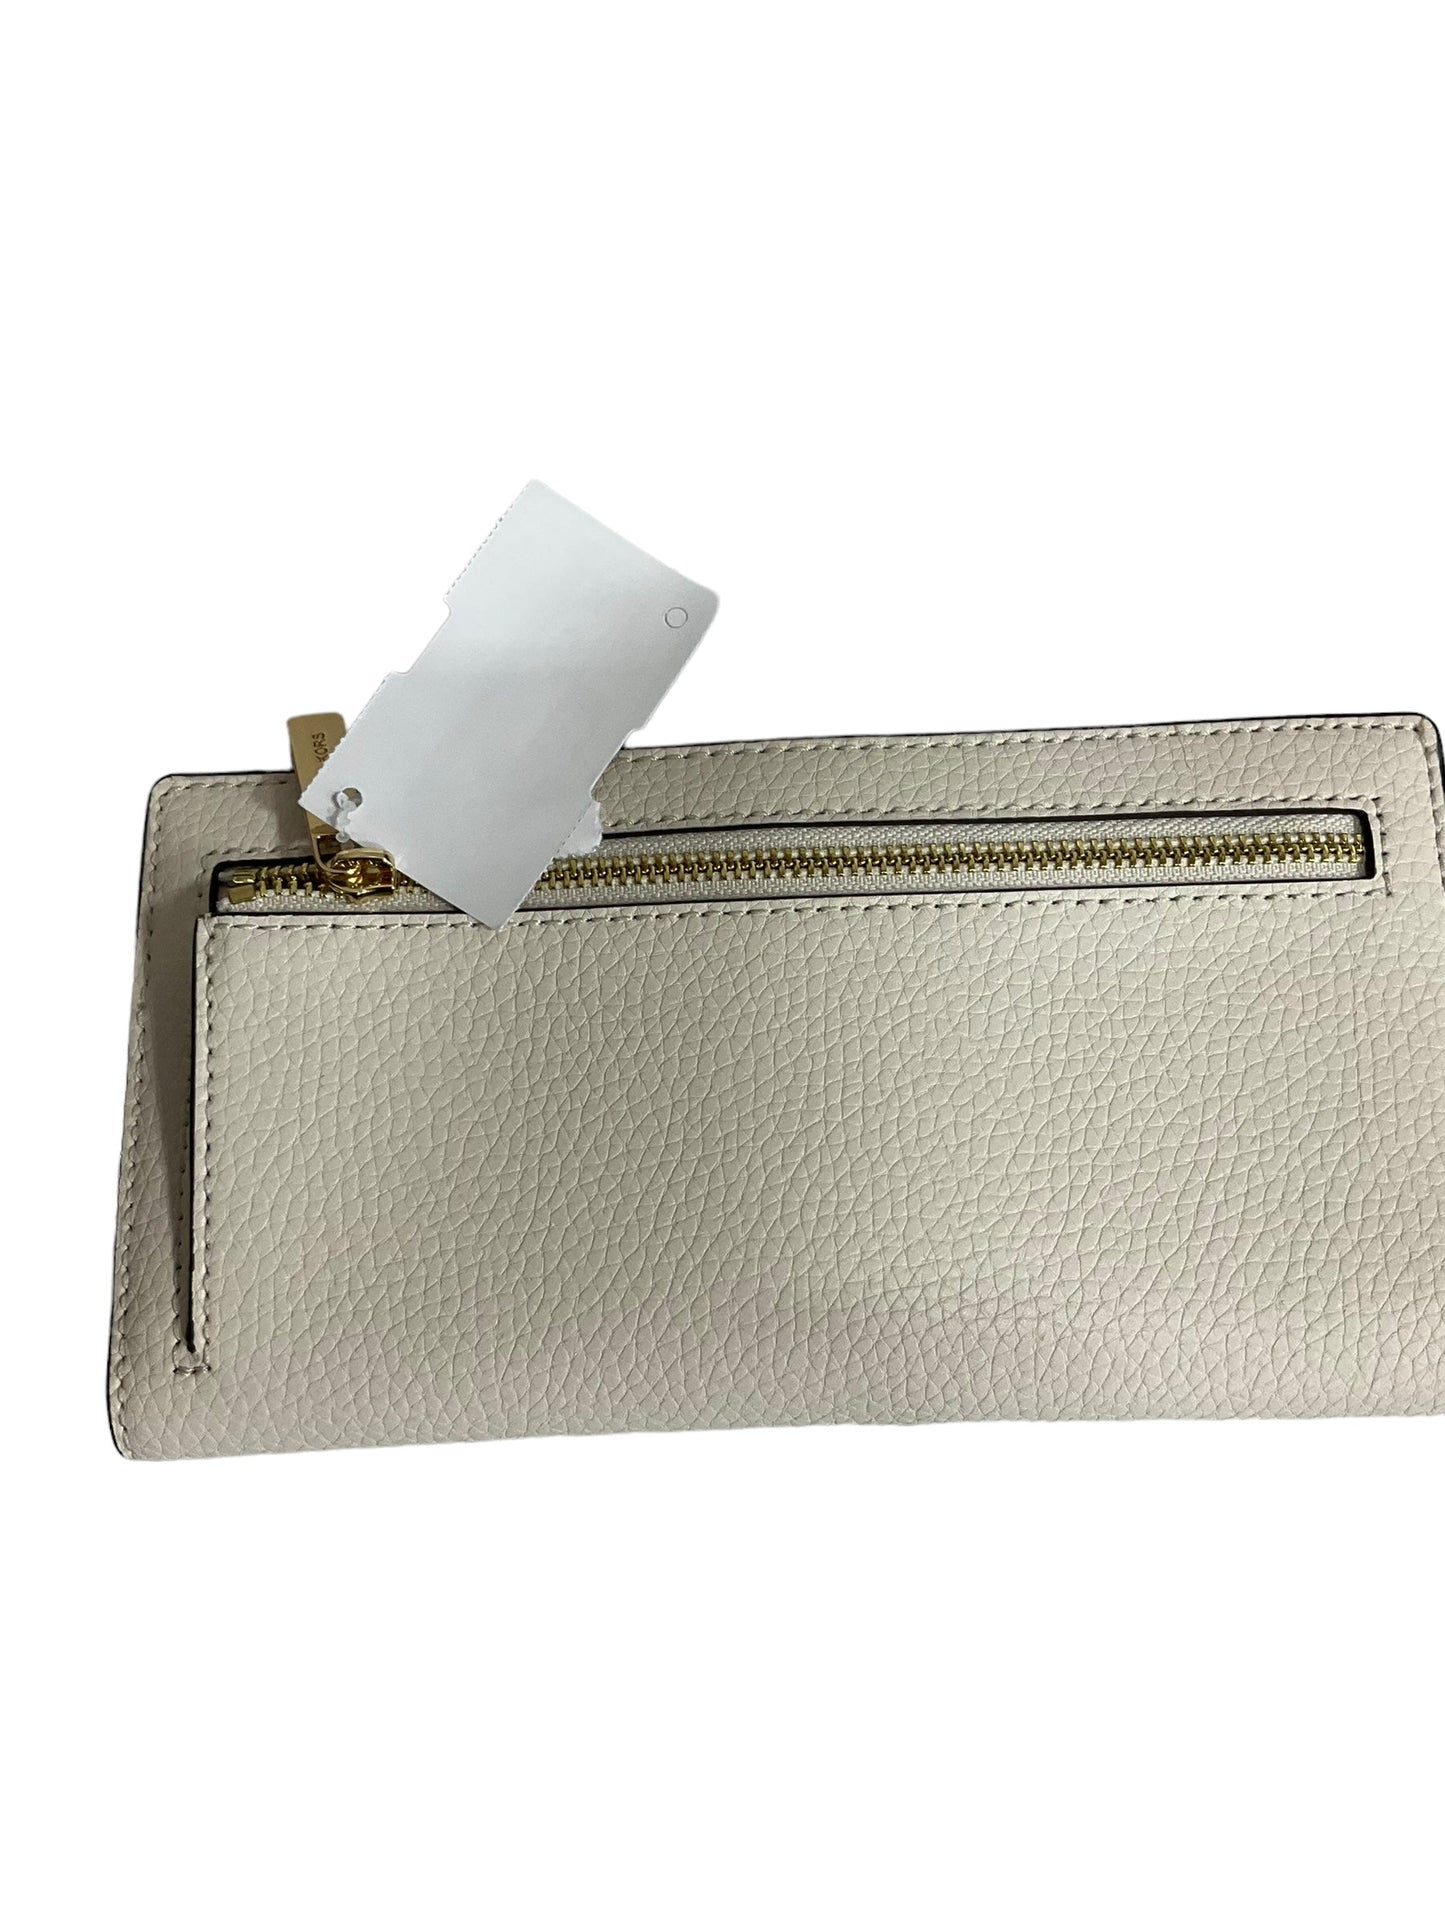 Wallet Leather By Michael Kors  Size: Medium